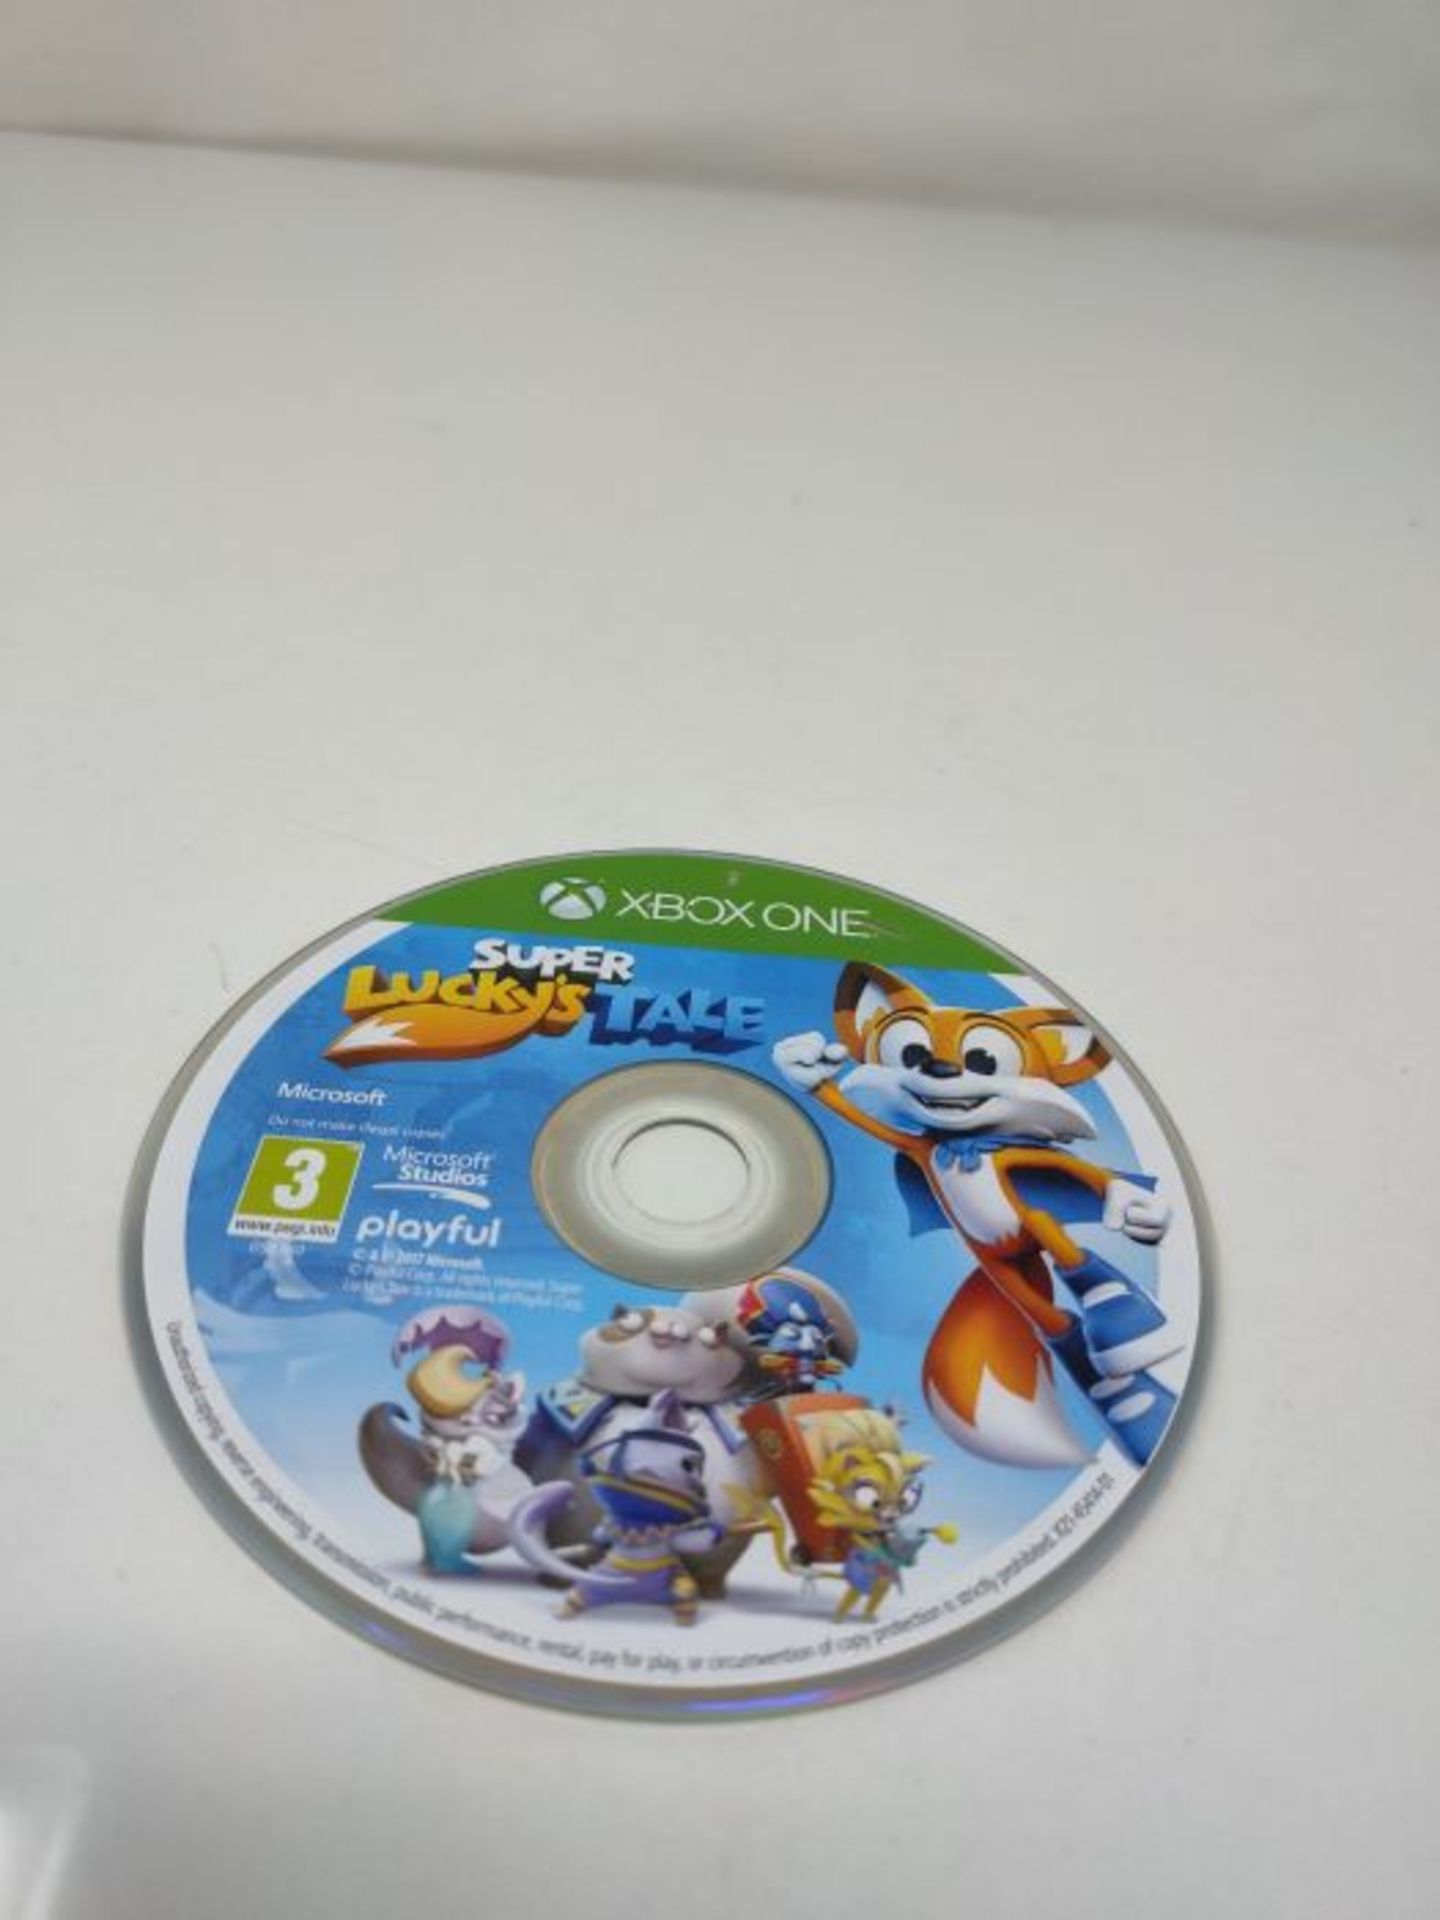 JEU CONSOLE MICROSOFT SUPER LUCKY'S TALE - XBOX ONE, FTP-00007 - Image 2 of 2